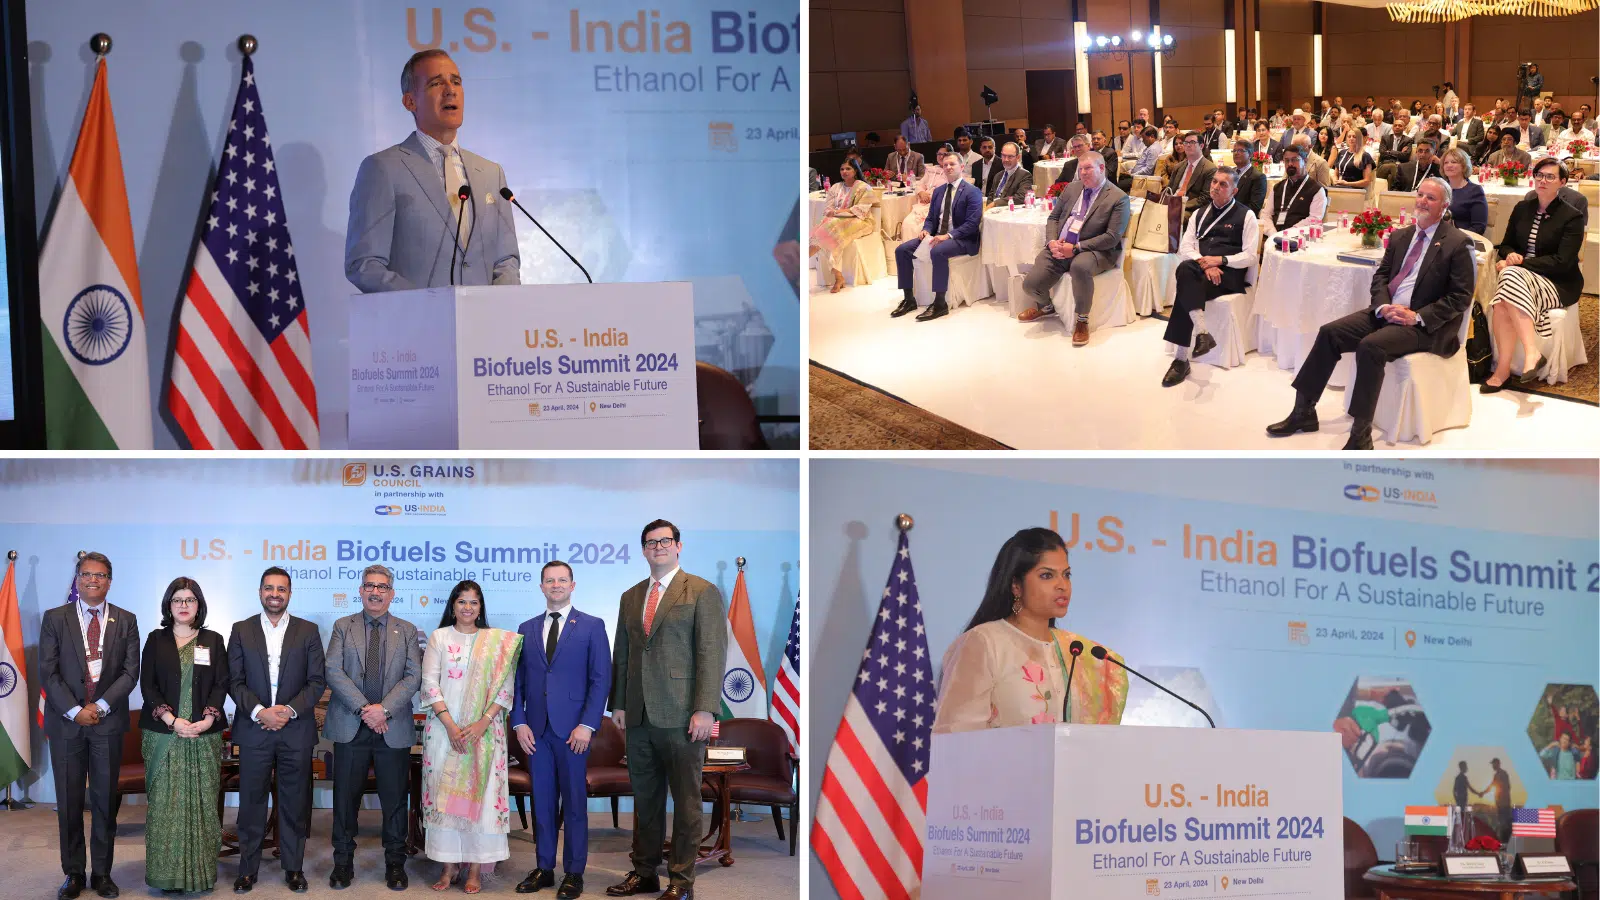 U.S. Grains Council and USISPF hosted the inaugural U.S. – India Biofuels Summit 2024 in New Delhi. (April 23, 2024)